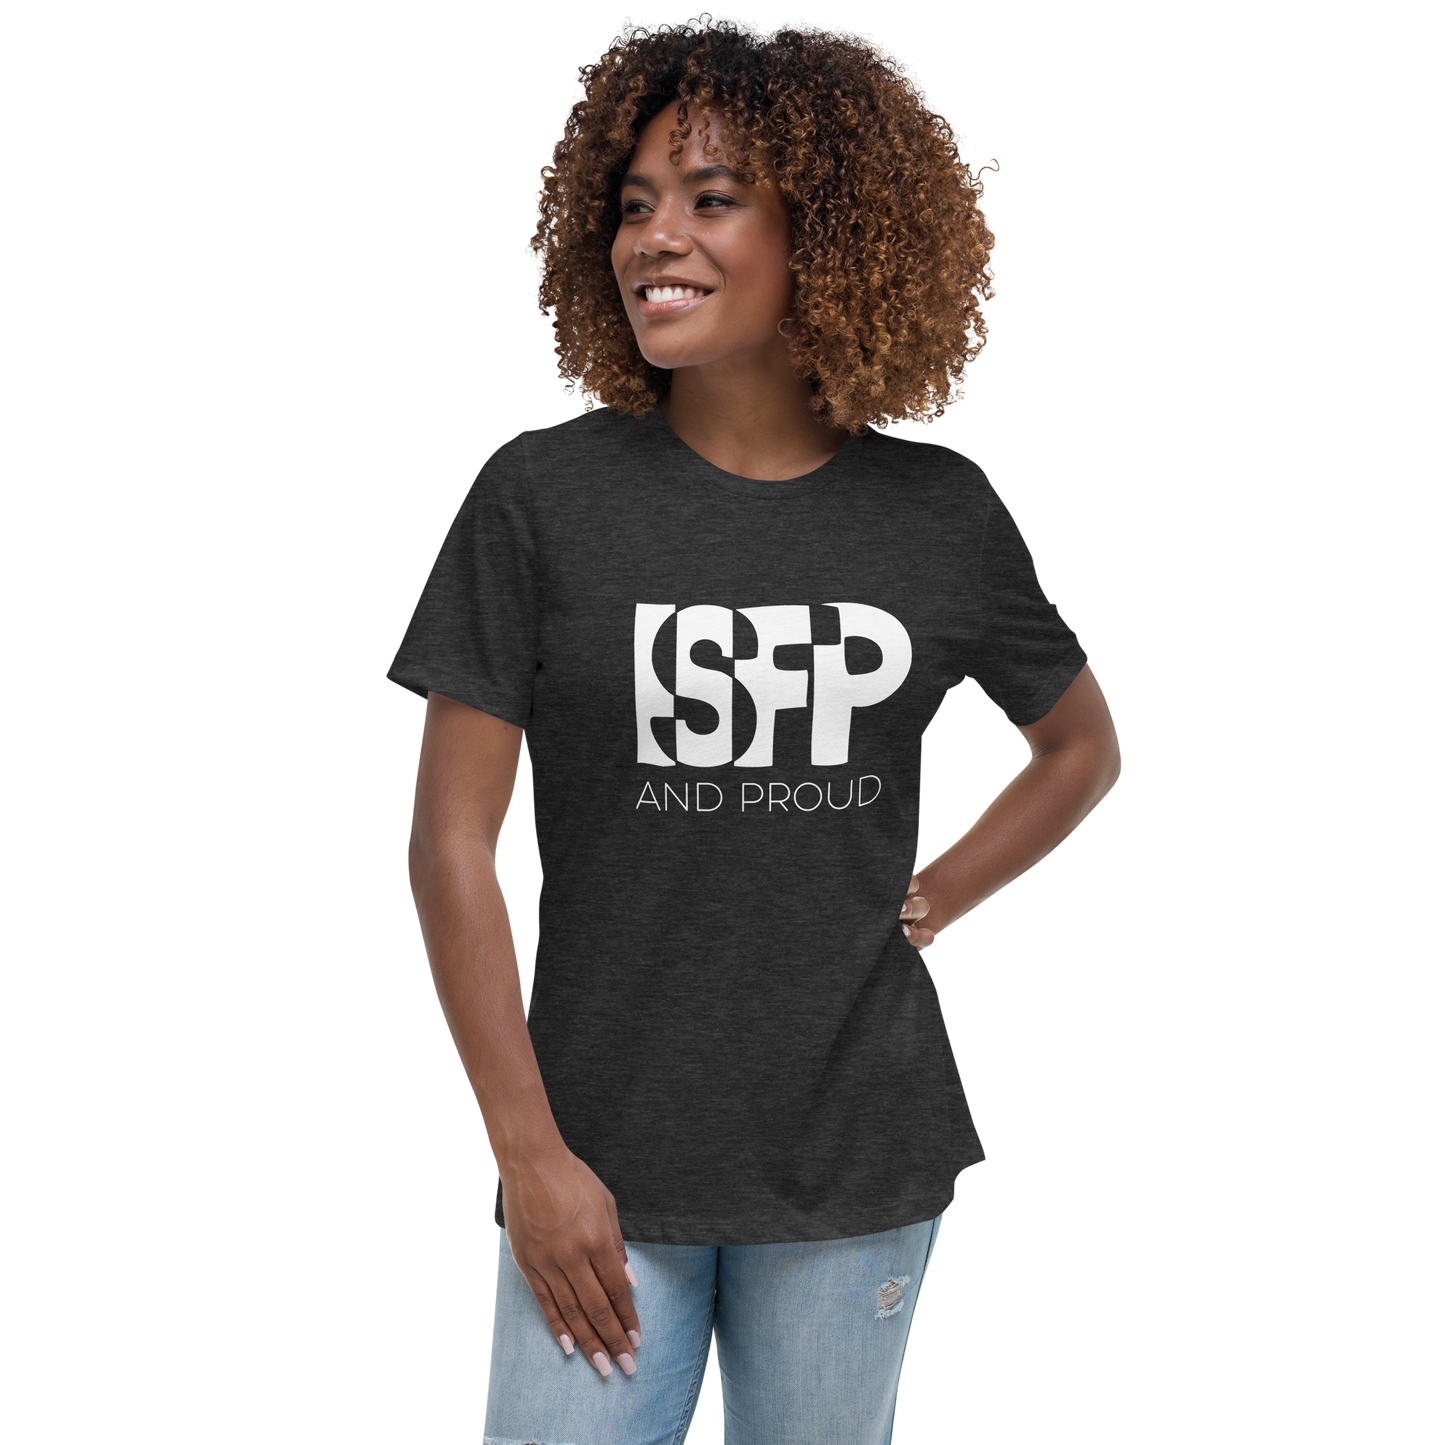 ISFP and Proud Tee